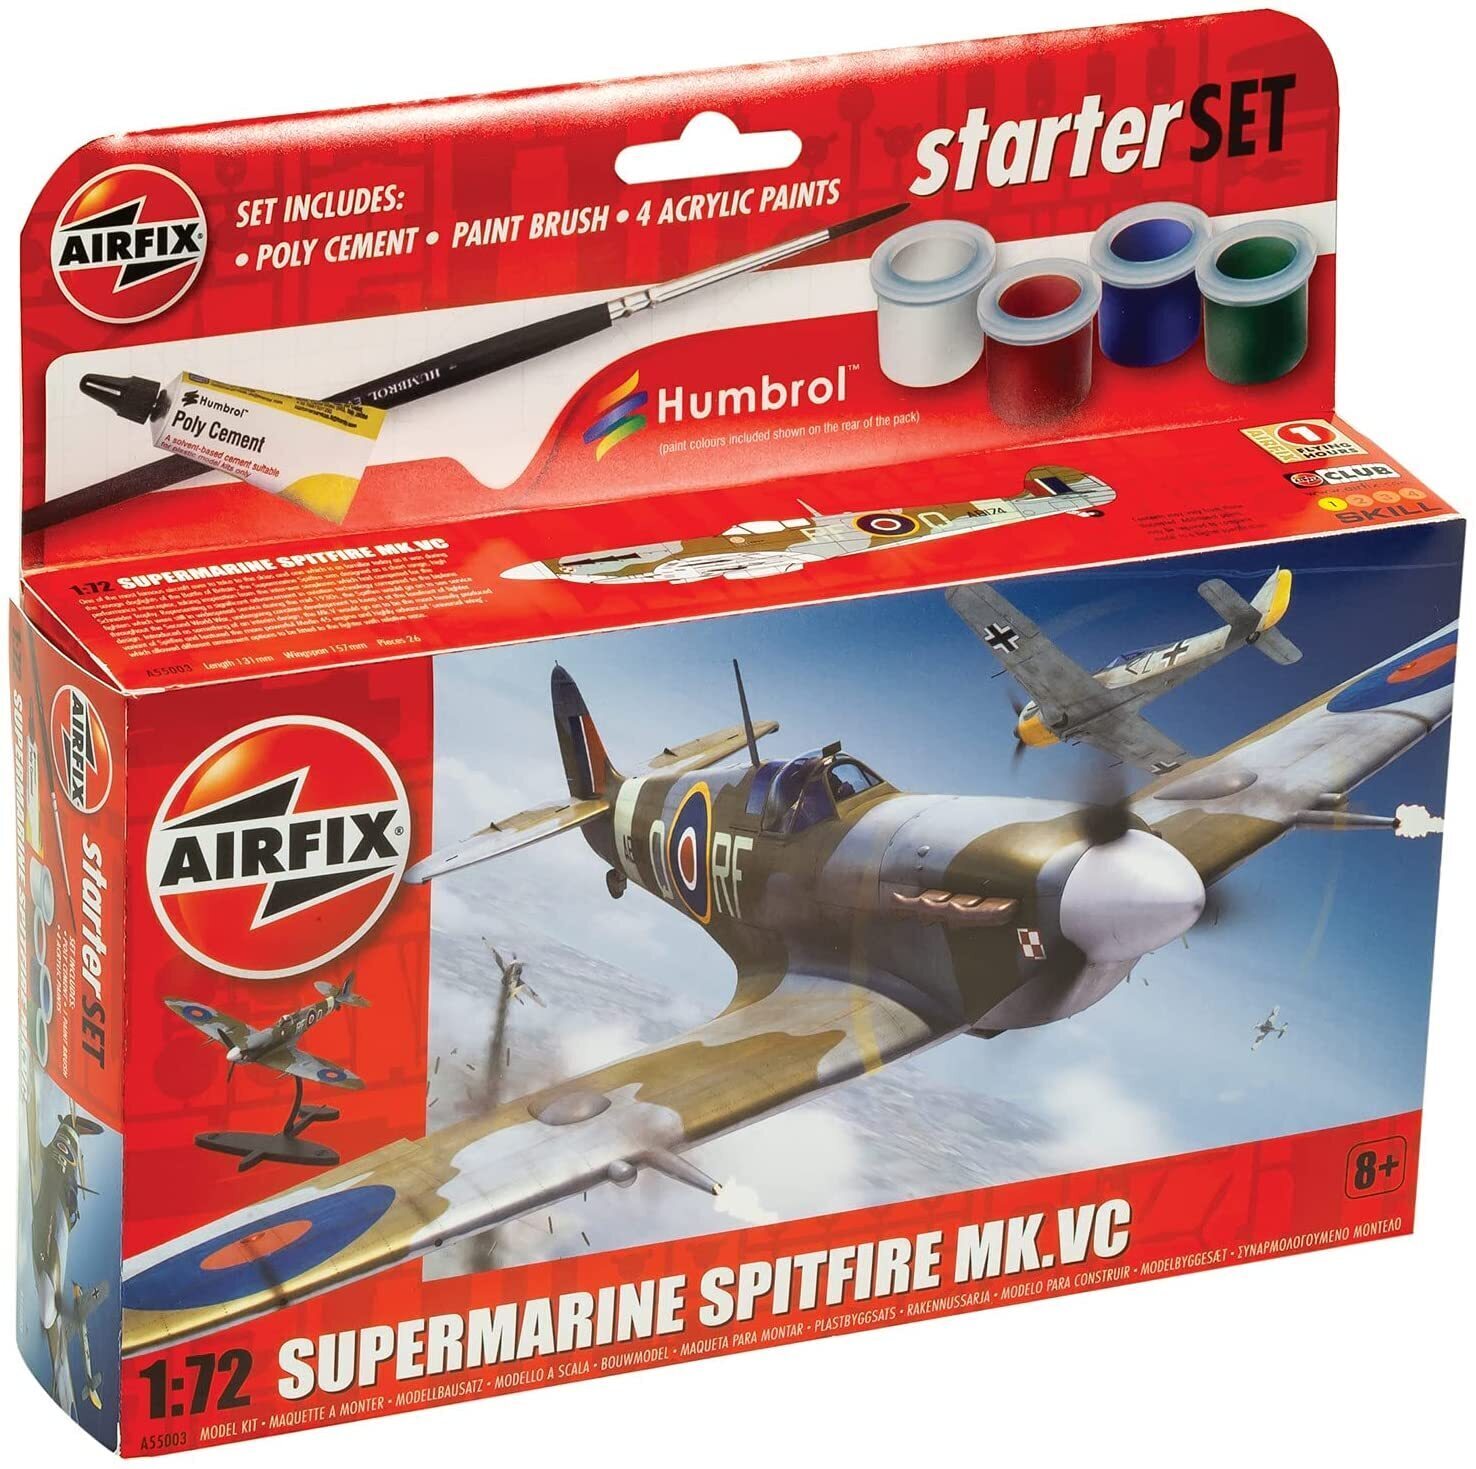 New Release Airfix 1:72nd Scale Supermarine Spitfire Mk.Vc Model Kit. 